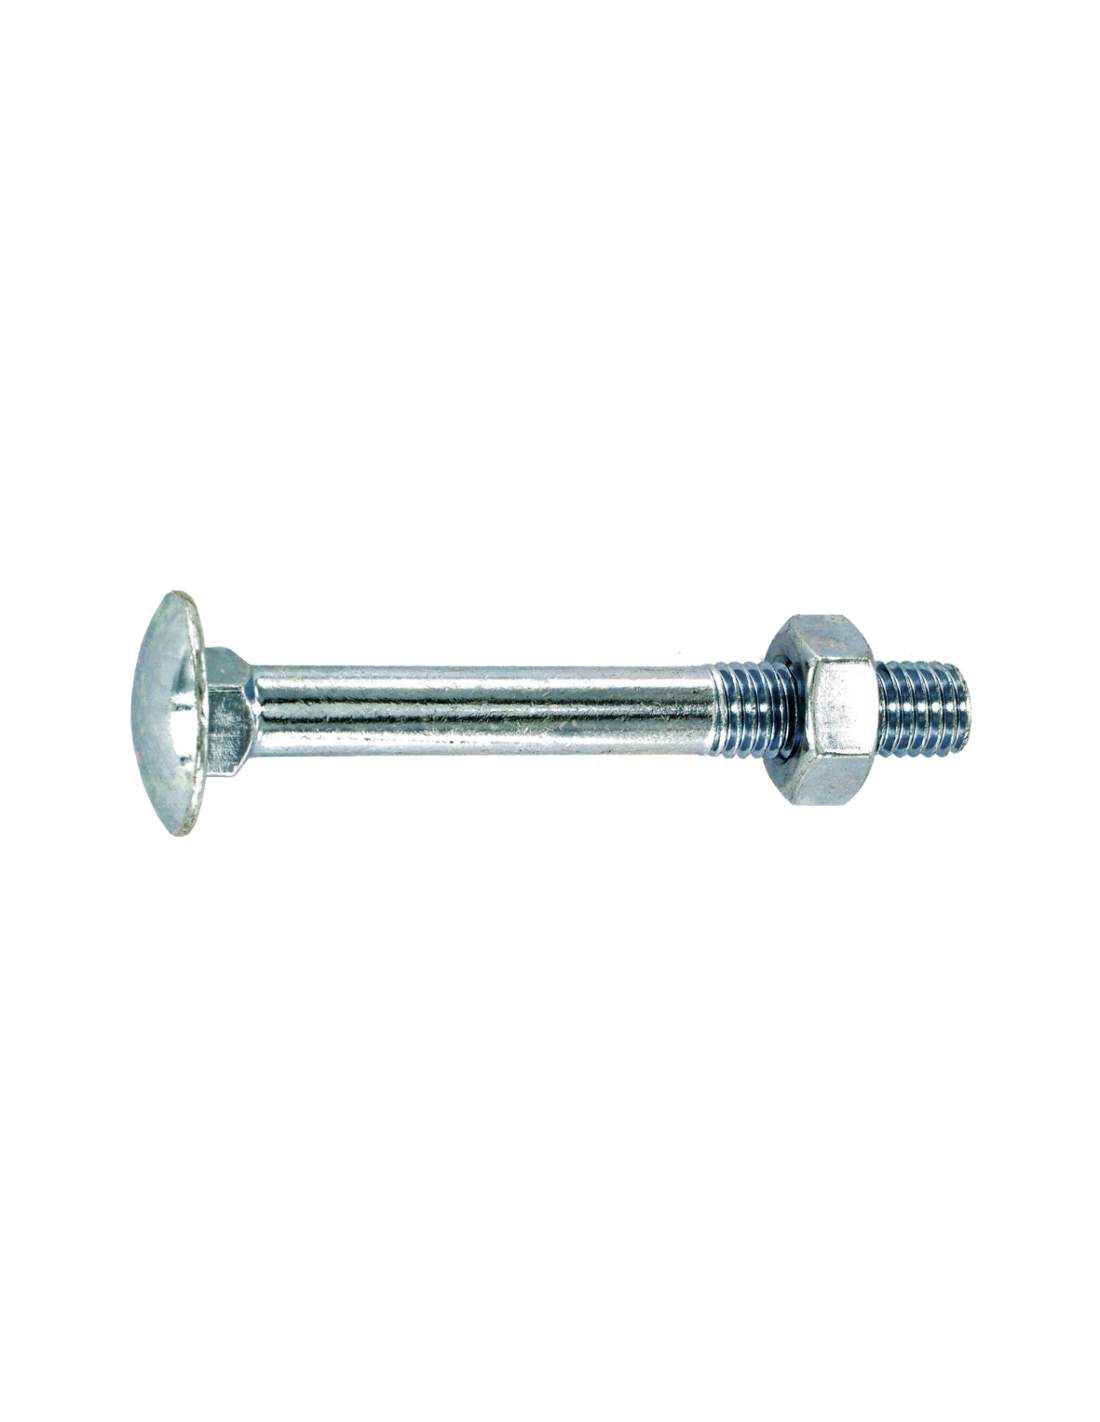 Zinc-plated steel round-head bolt with square collar 10x100mm, 2 pcs.